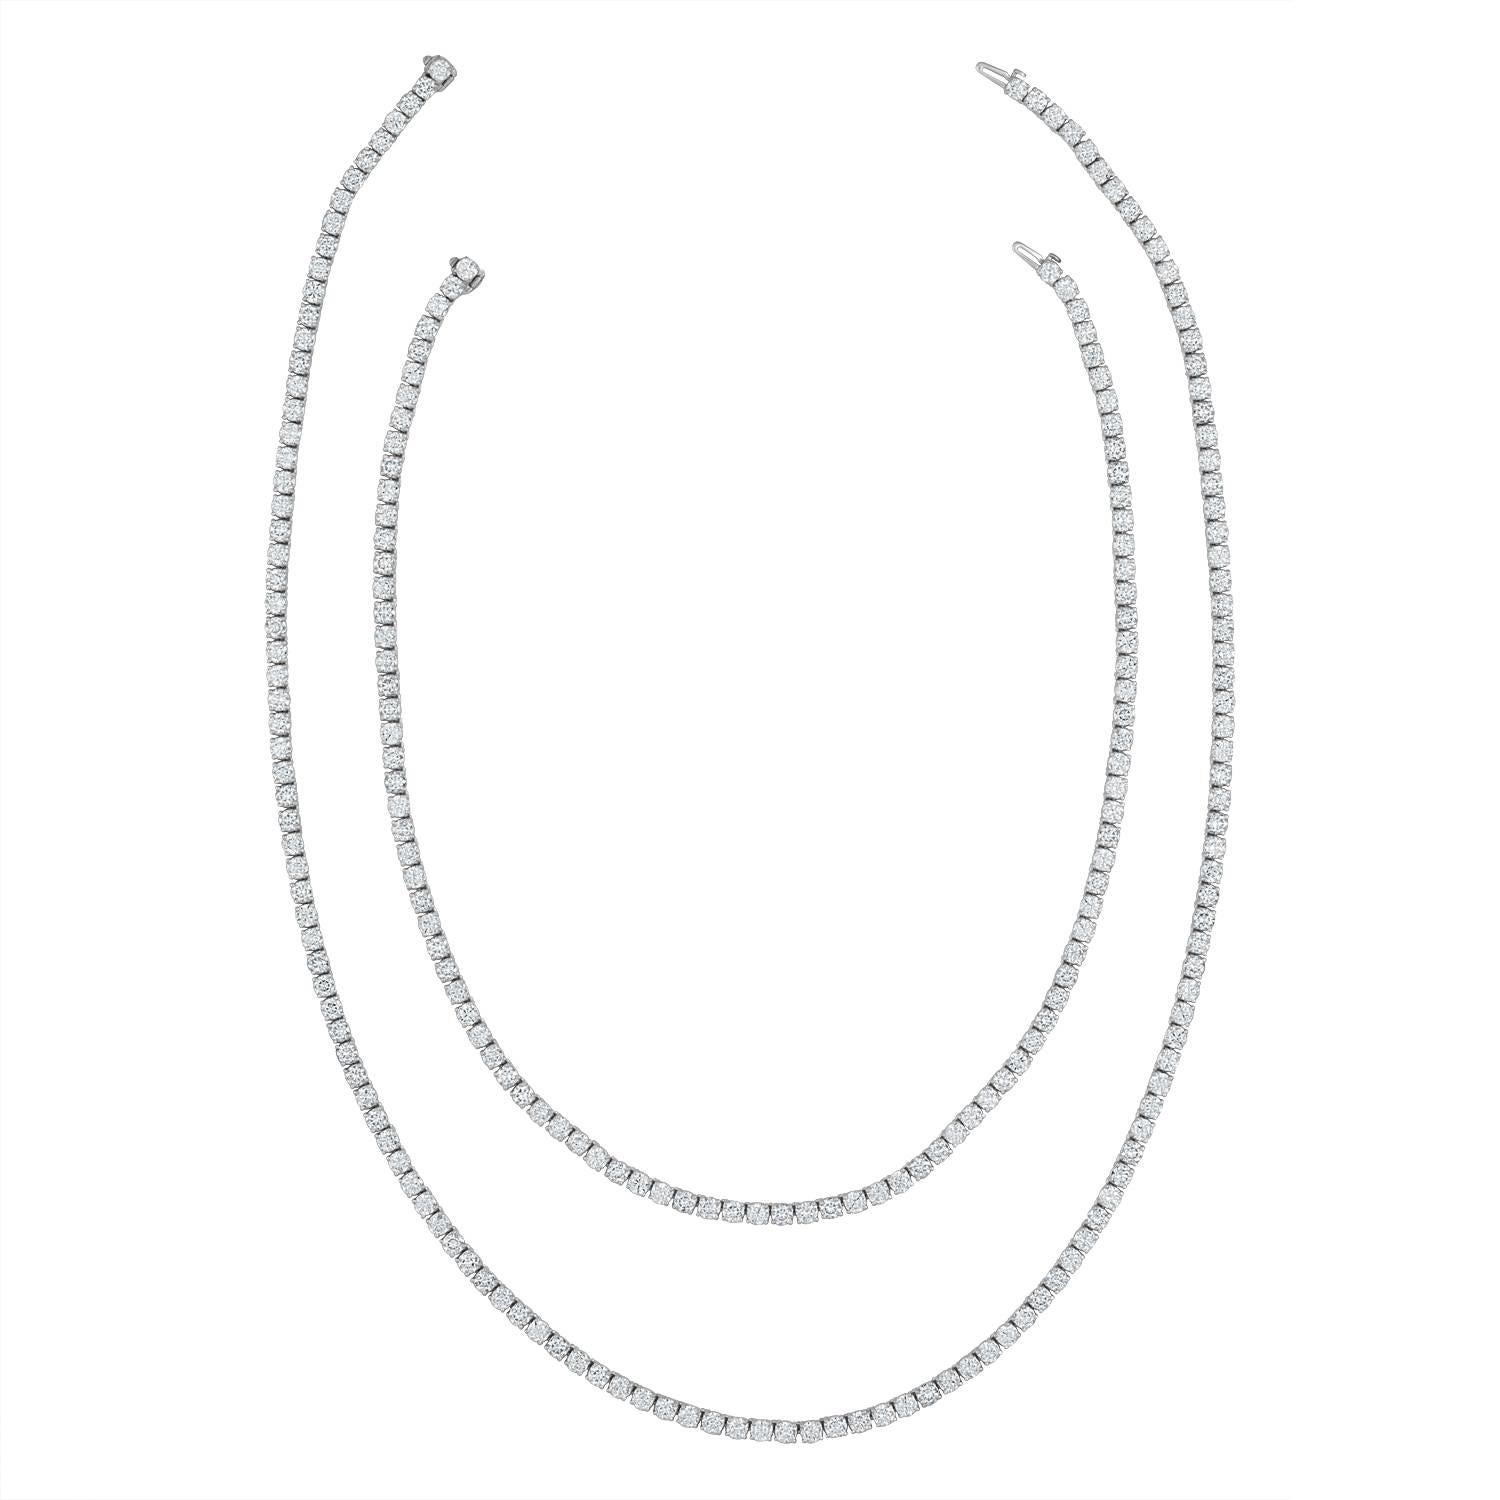 230 Brilliant Diamonds, 55.60 Carat TWT, are set in two separates strings of tennis necklace.
One String is 24.5” Long with 135 Round Brilliants. The Second is 17” Long with 95 Round Brilliants. The Diamonds are Estimated to be F/G in Color and SI